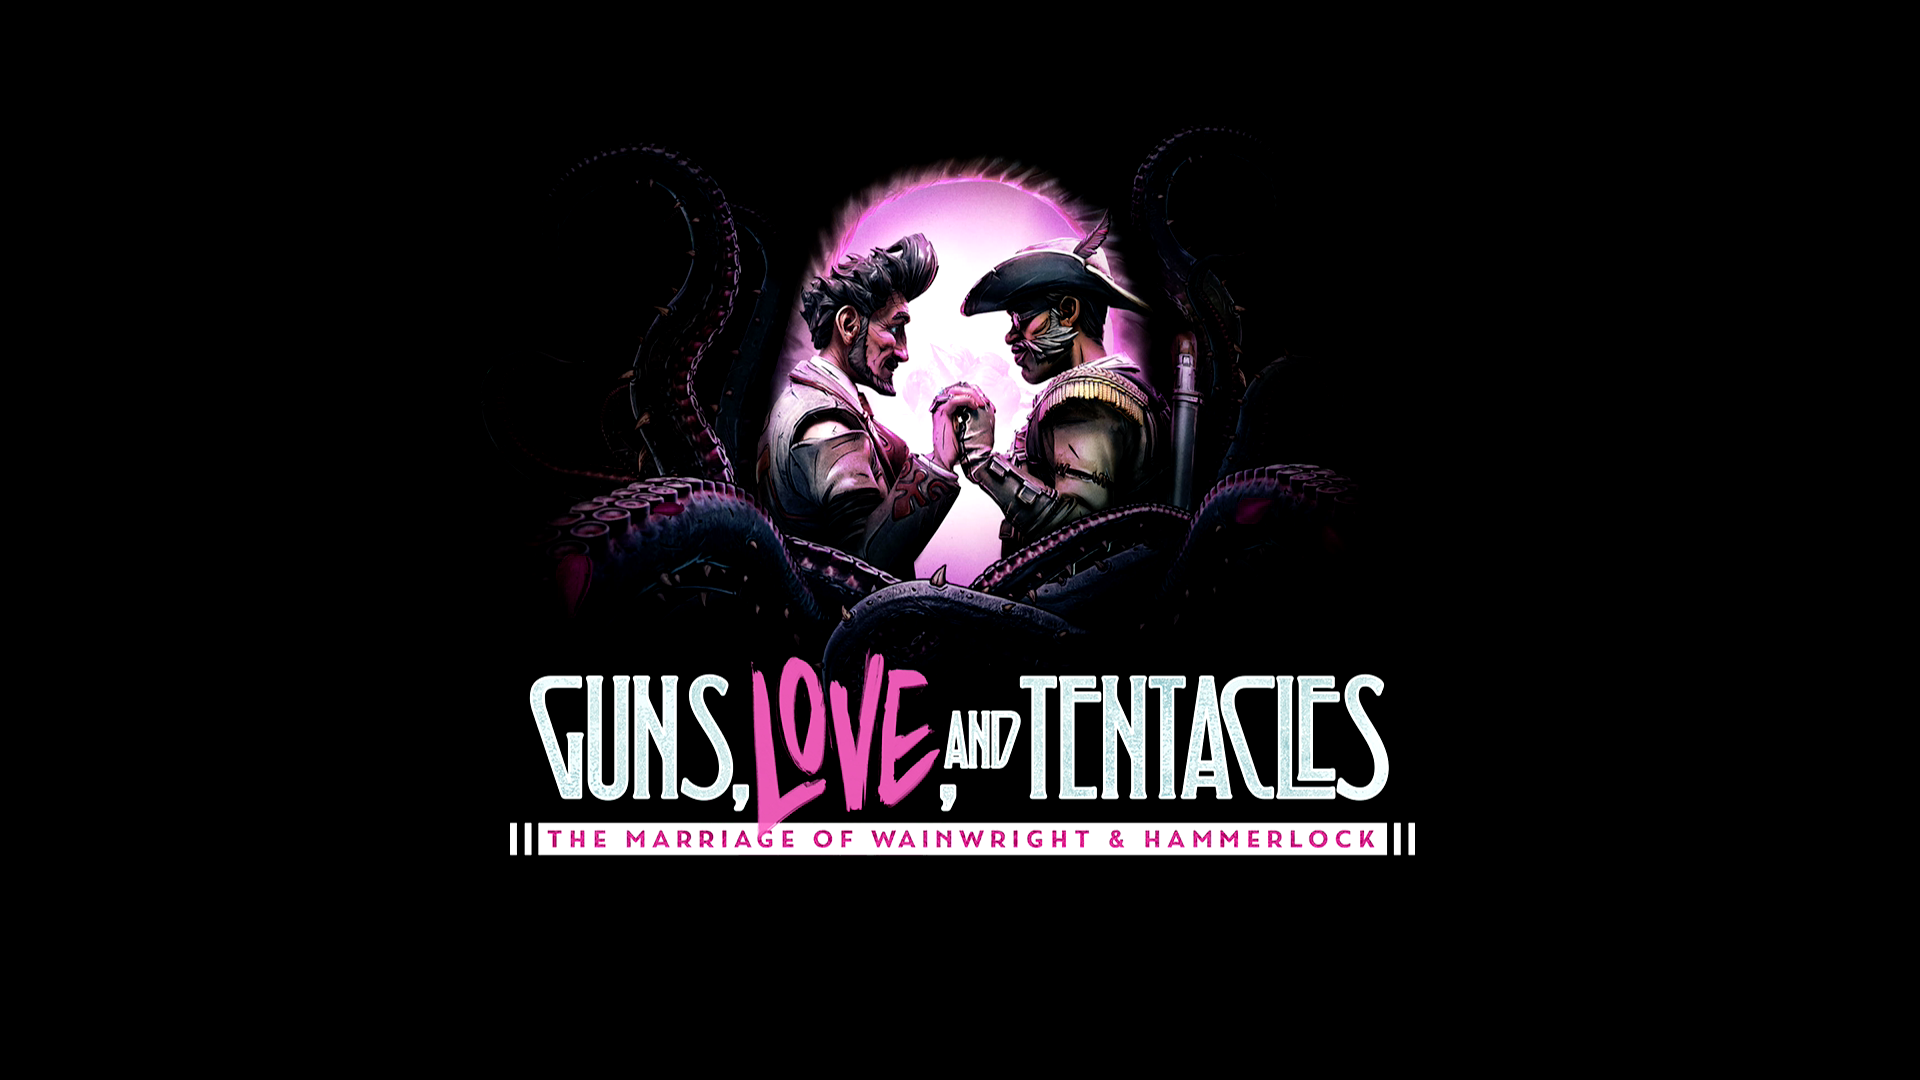 Borderlands 3 – Guns, Love and Tentacles Review